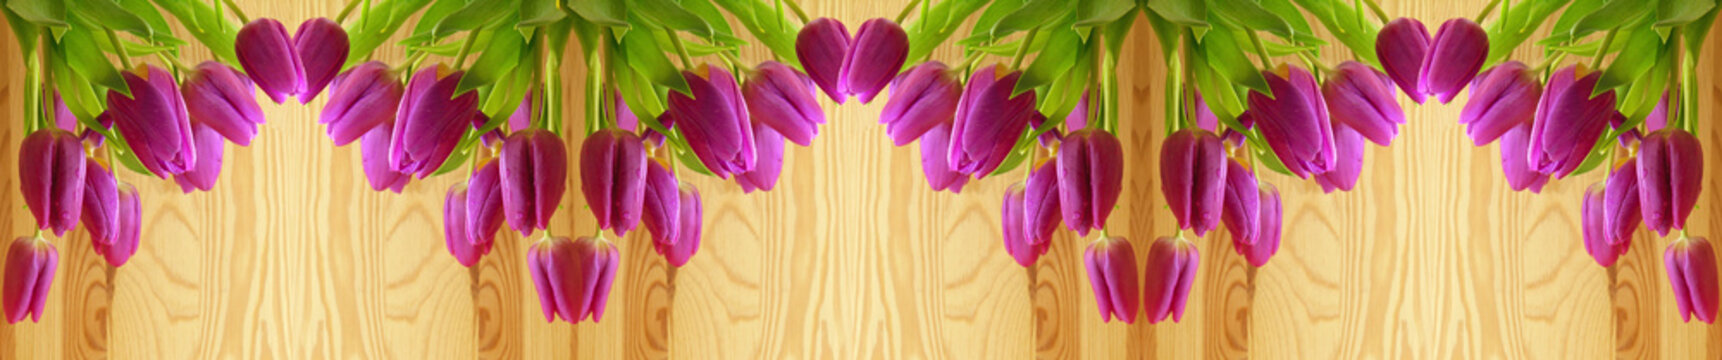 Pink tulips background.